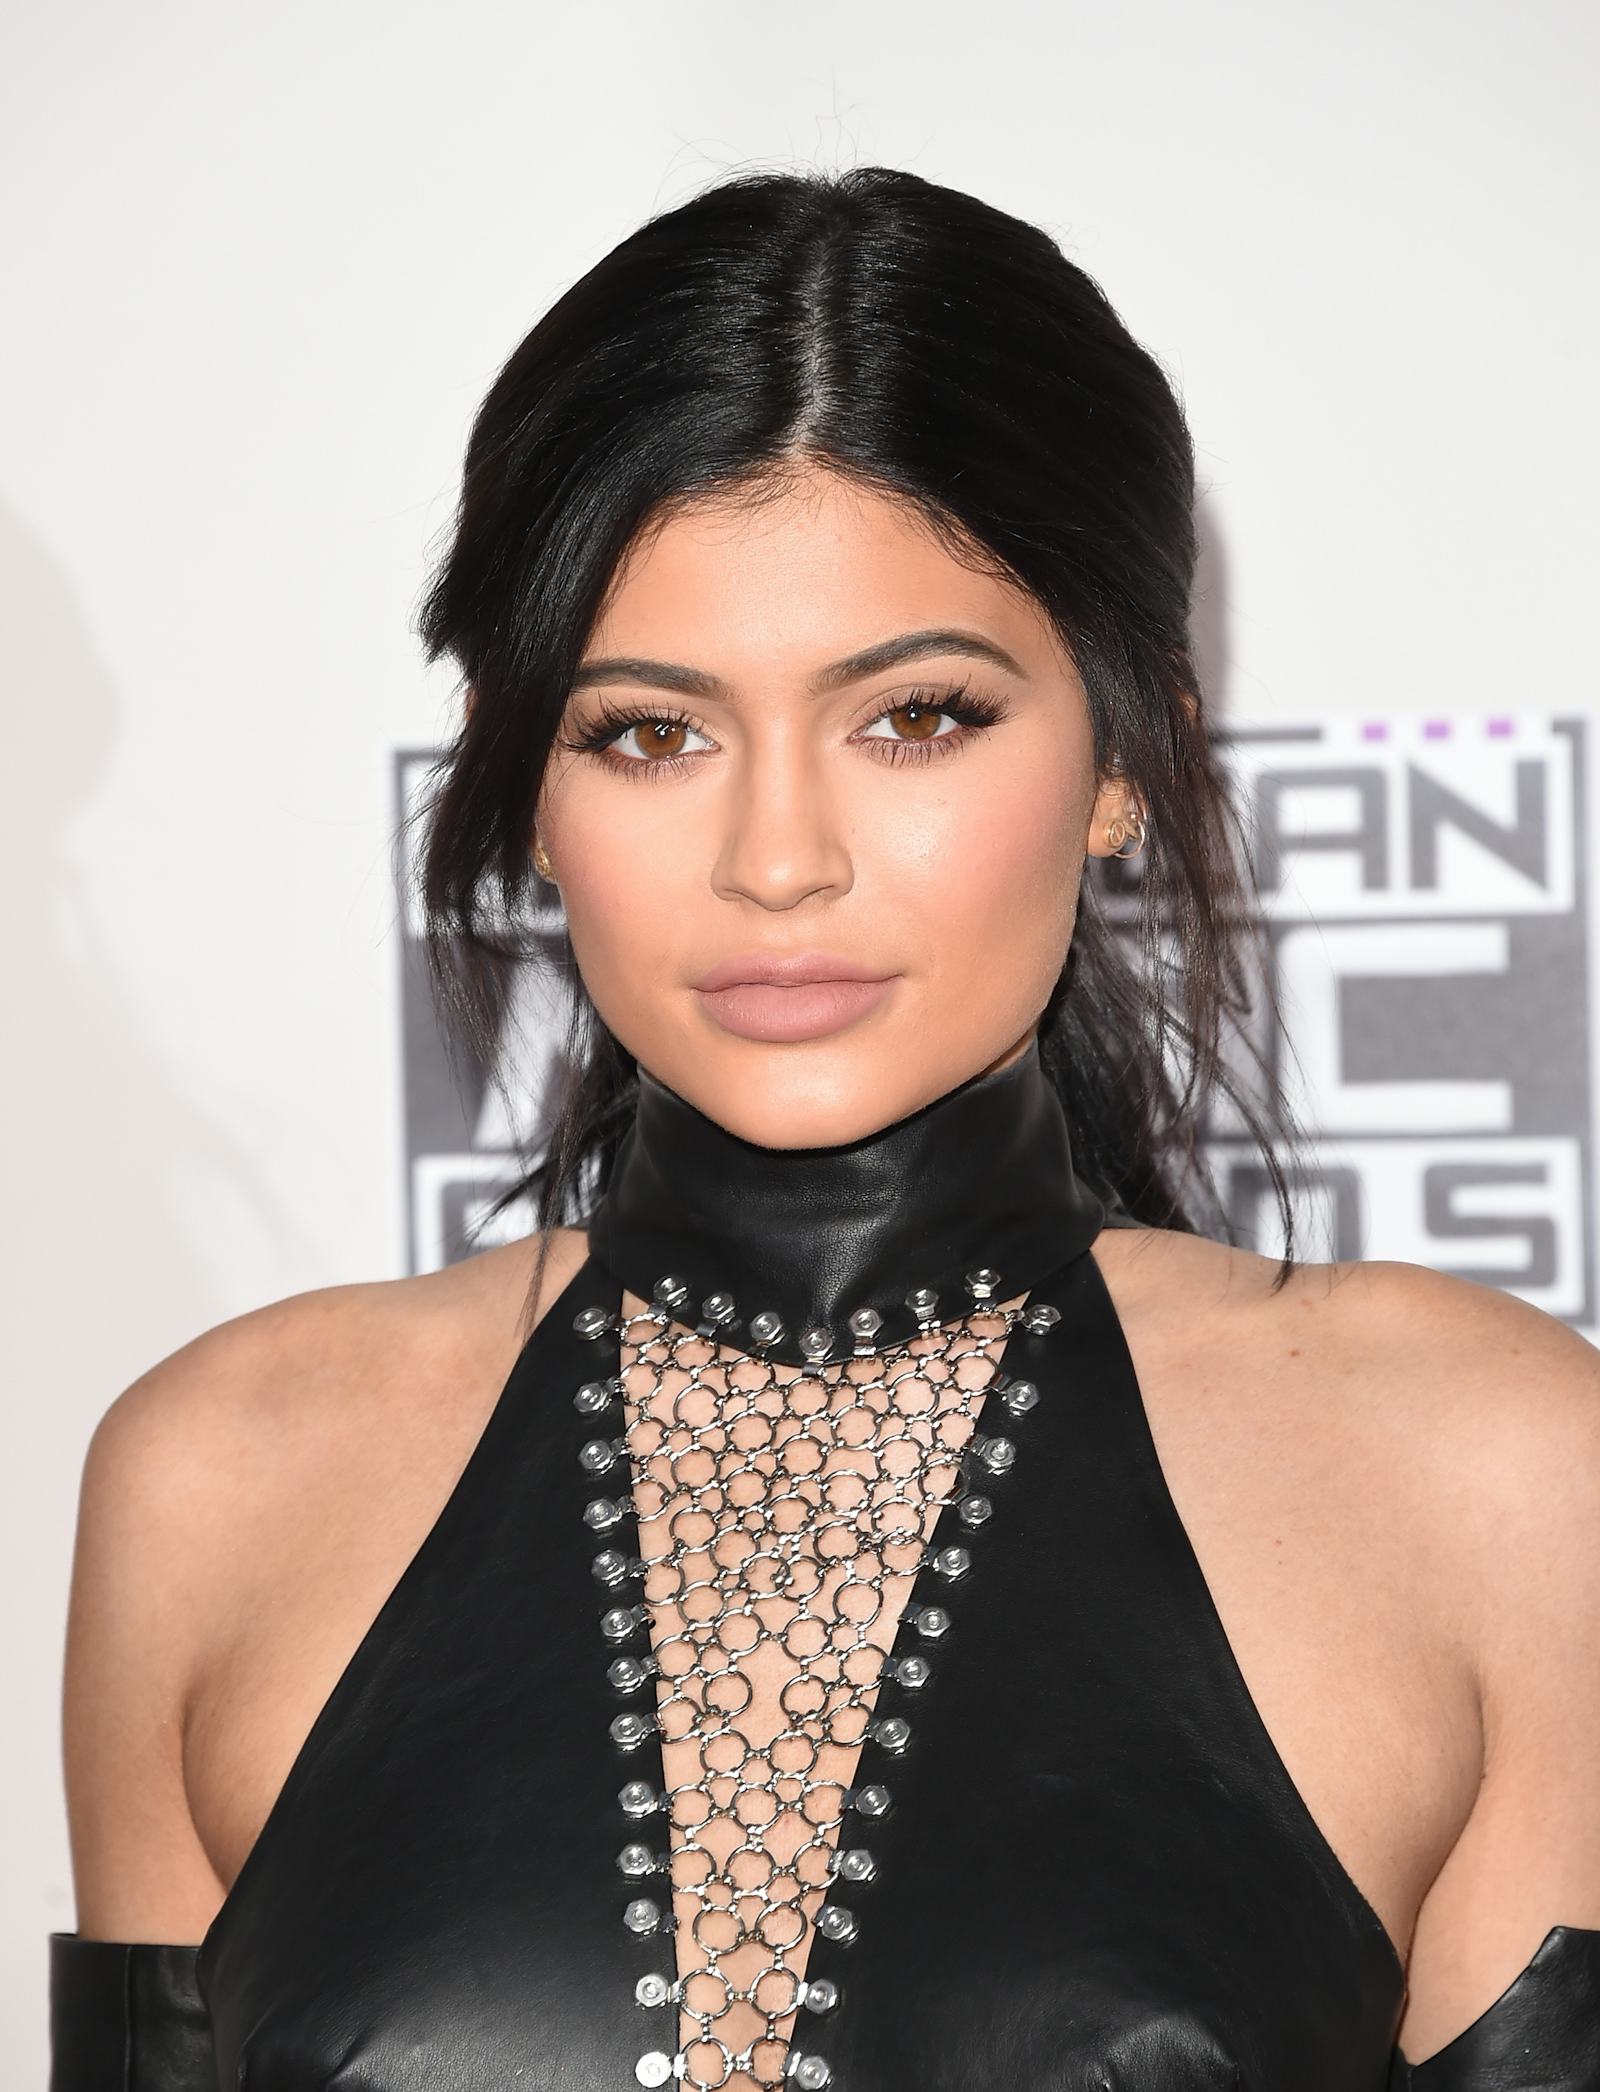 The 10 Best Kylie Jenner Lipstick Colors She Rocked In 2015 — PHOTOS